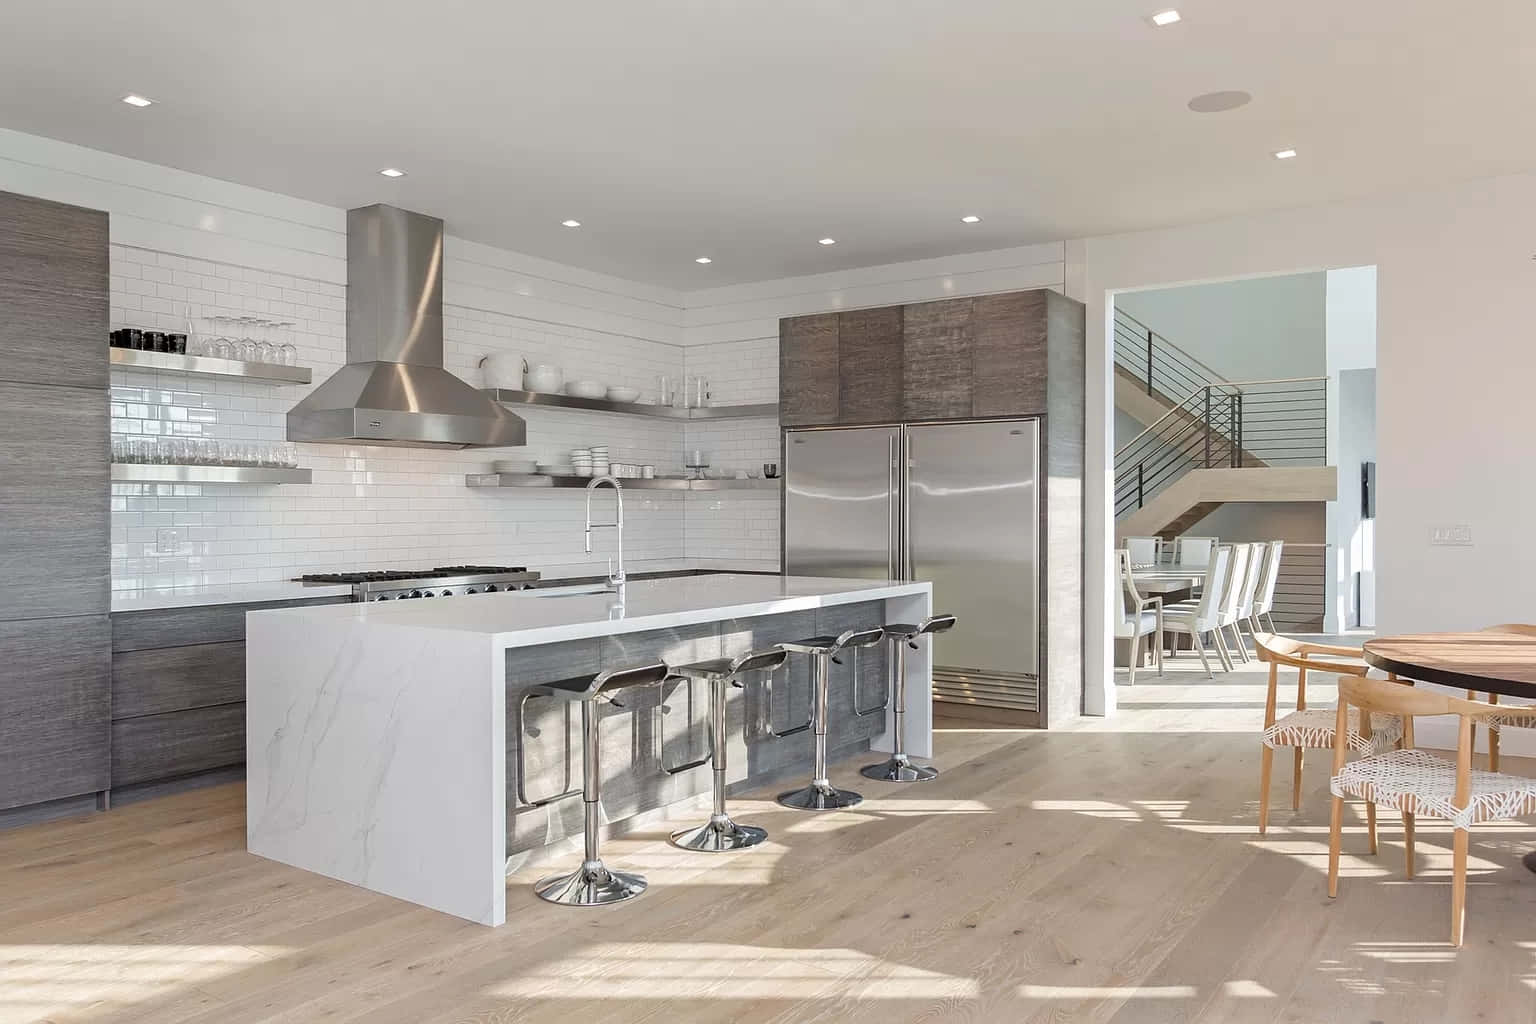 A Modern Kitchen With Wood Floors And A Wooden Island